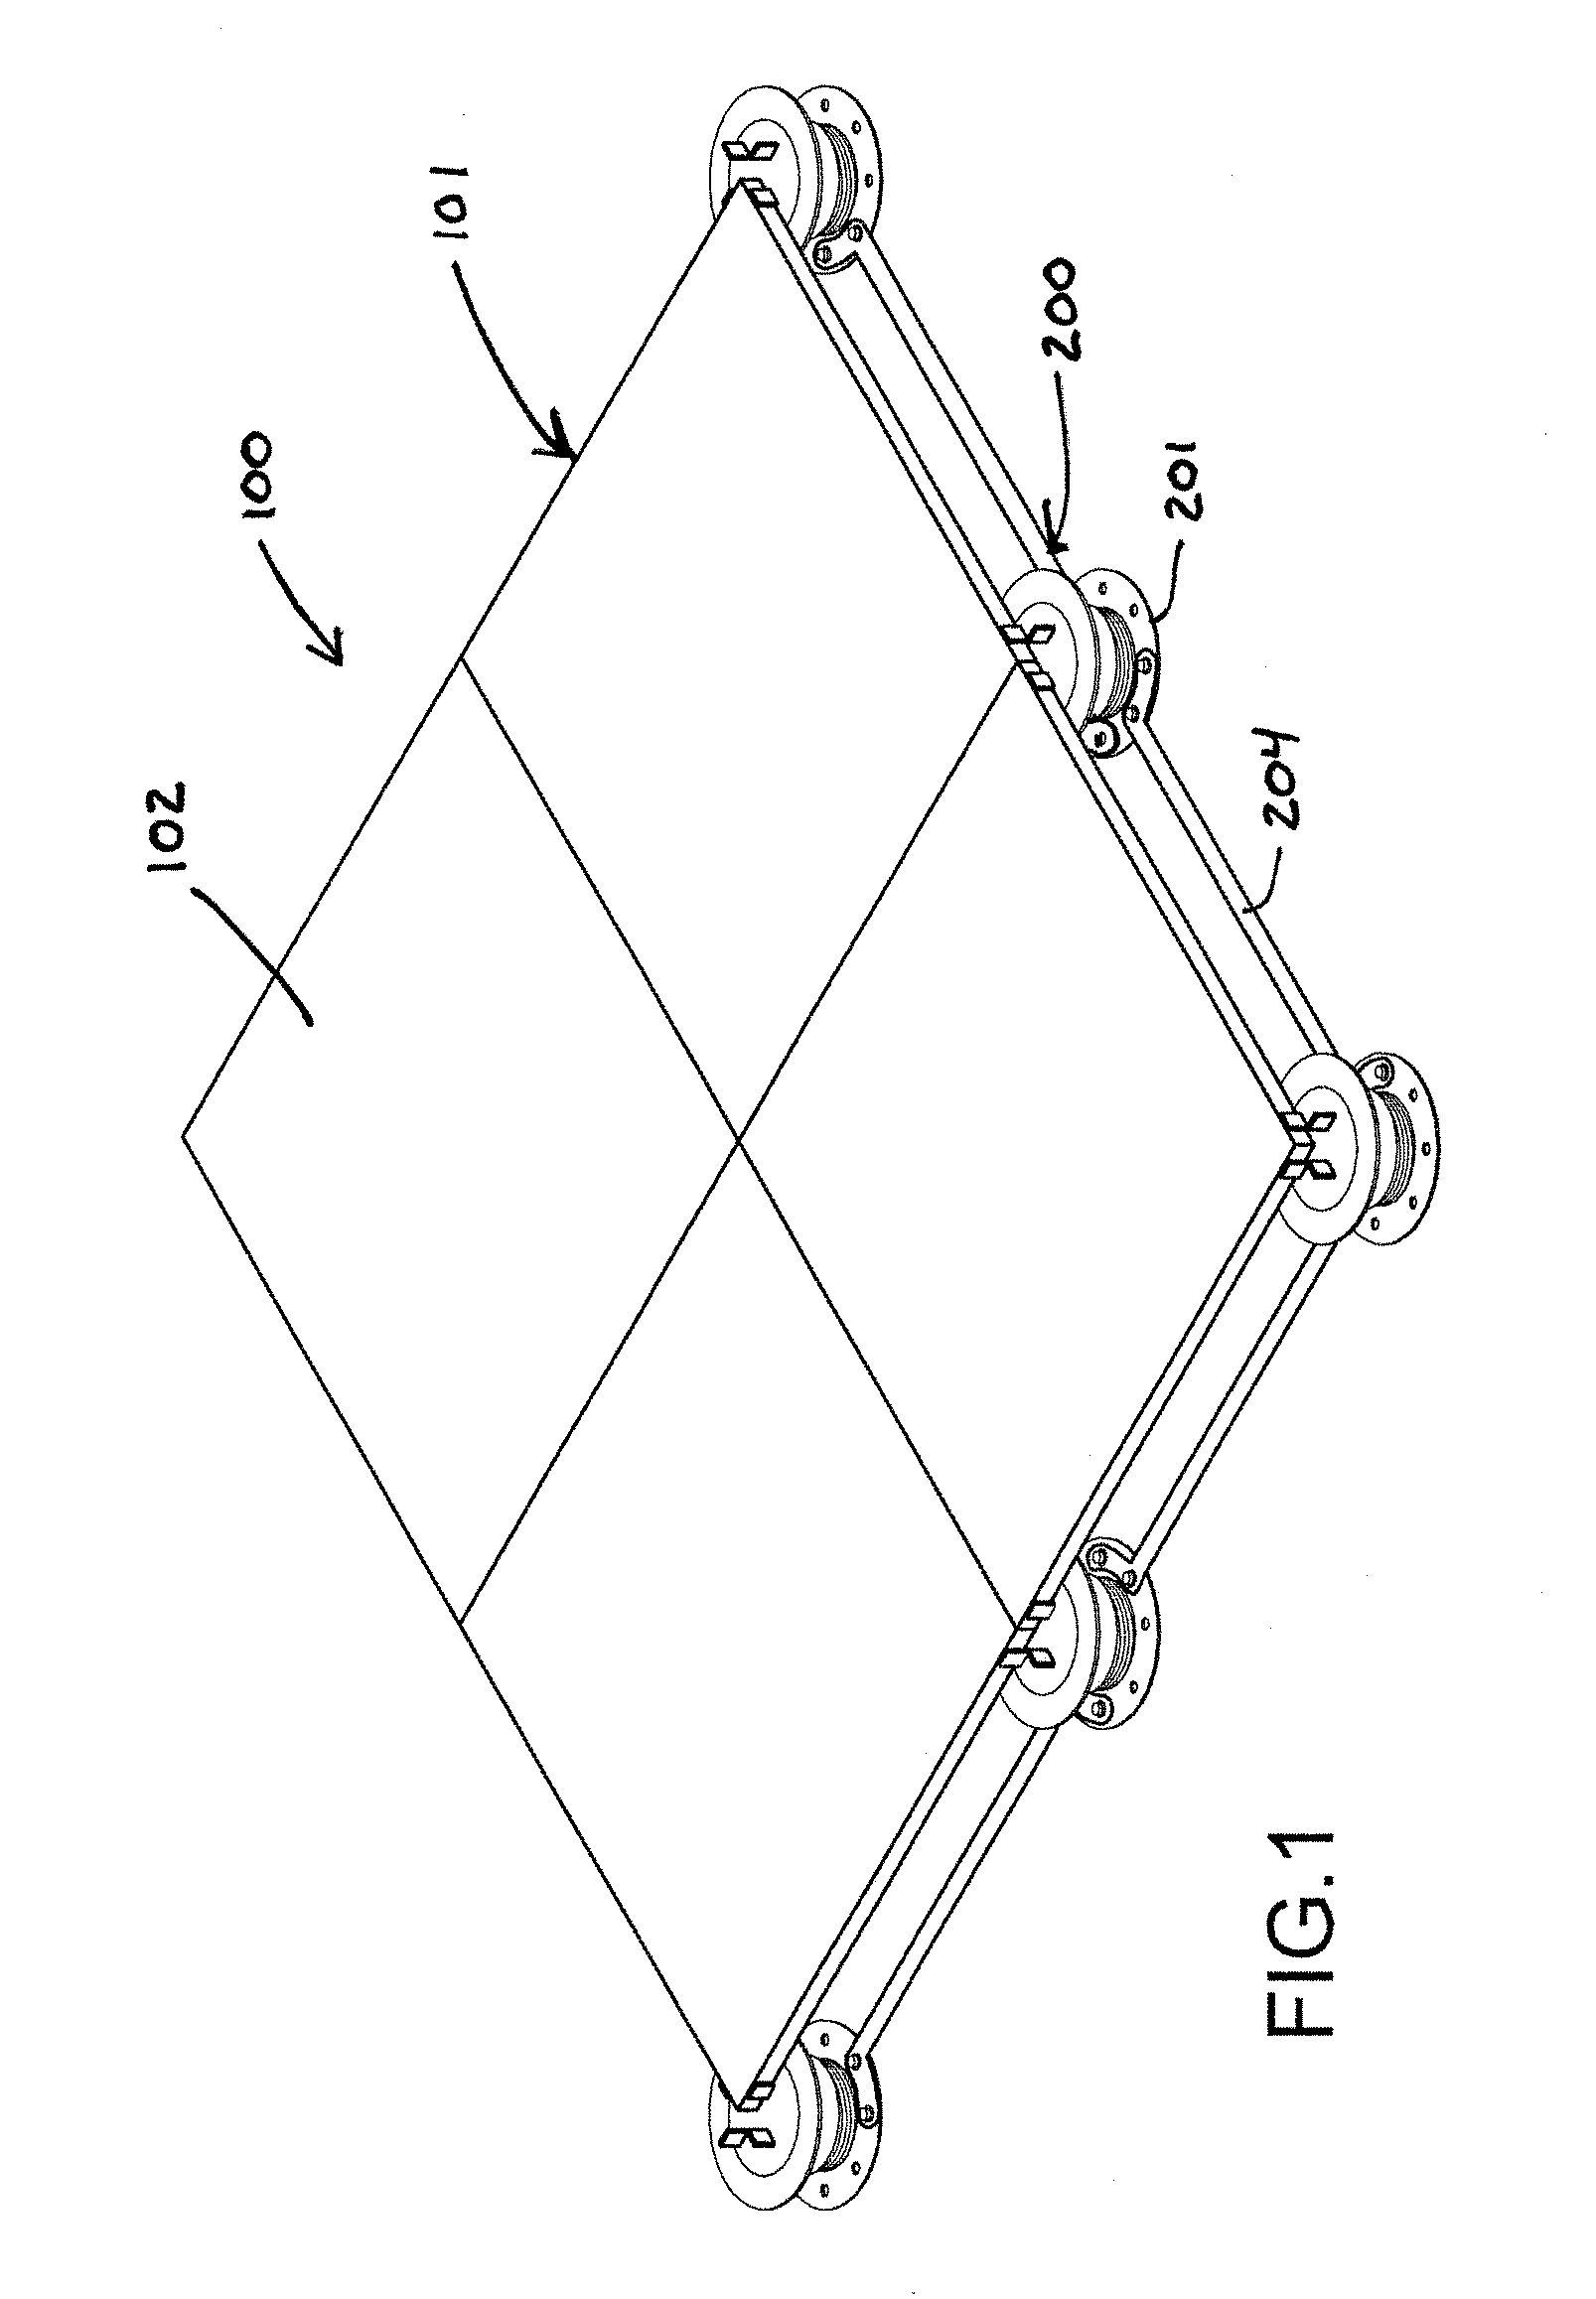 Stability bracing of a support structure for elevating a building structure